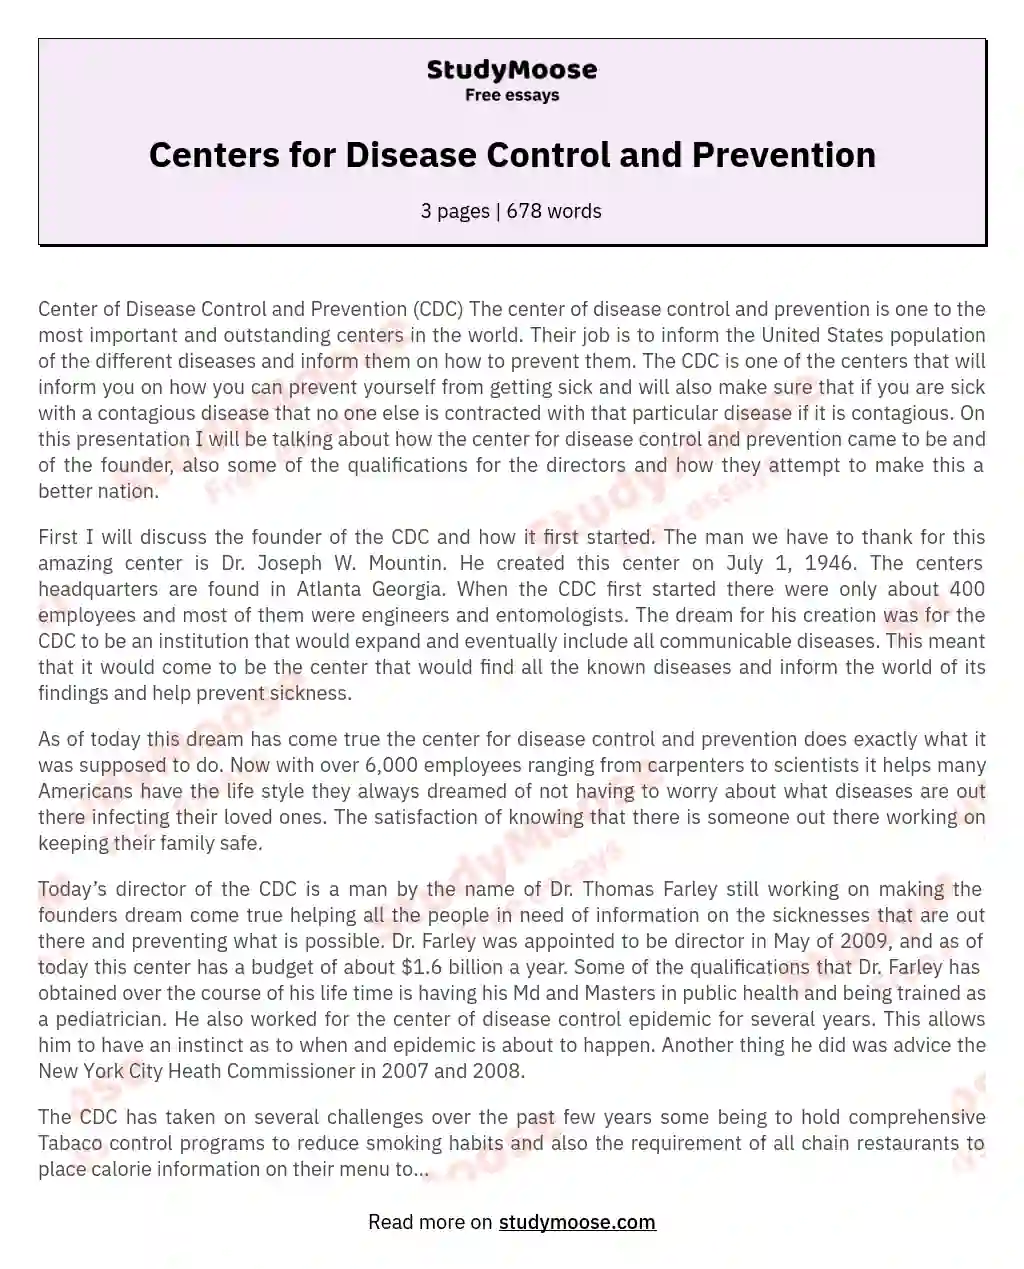 Centers for Disease Control and Prevention essay